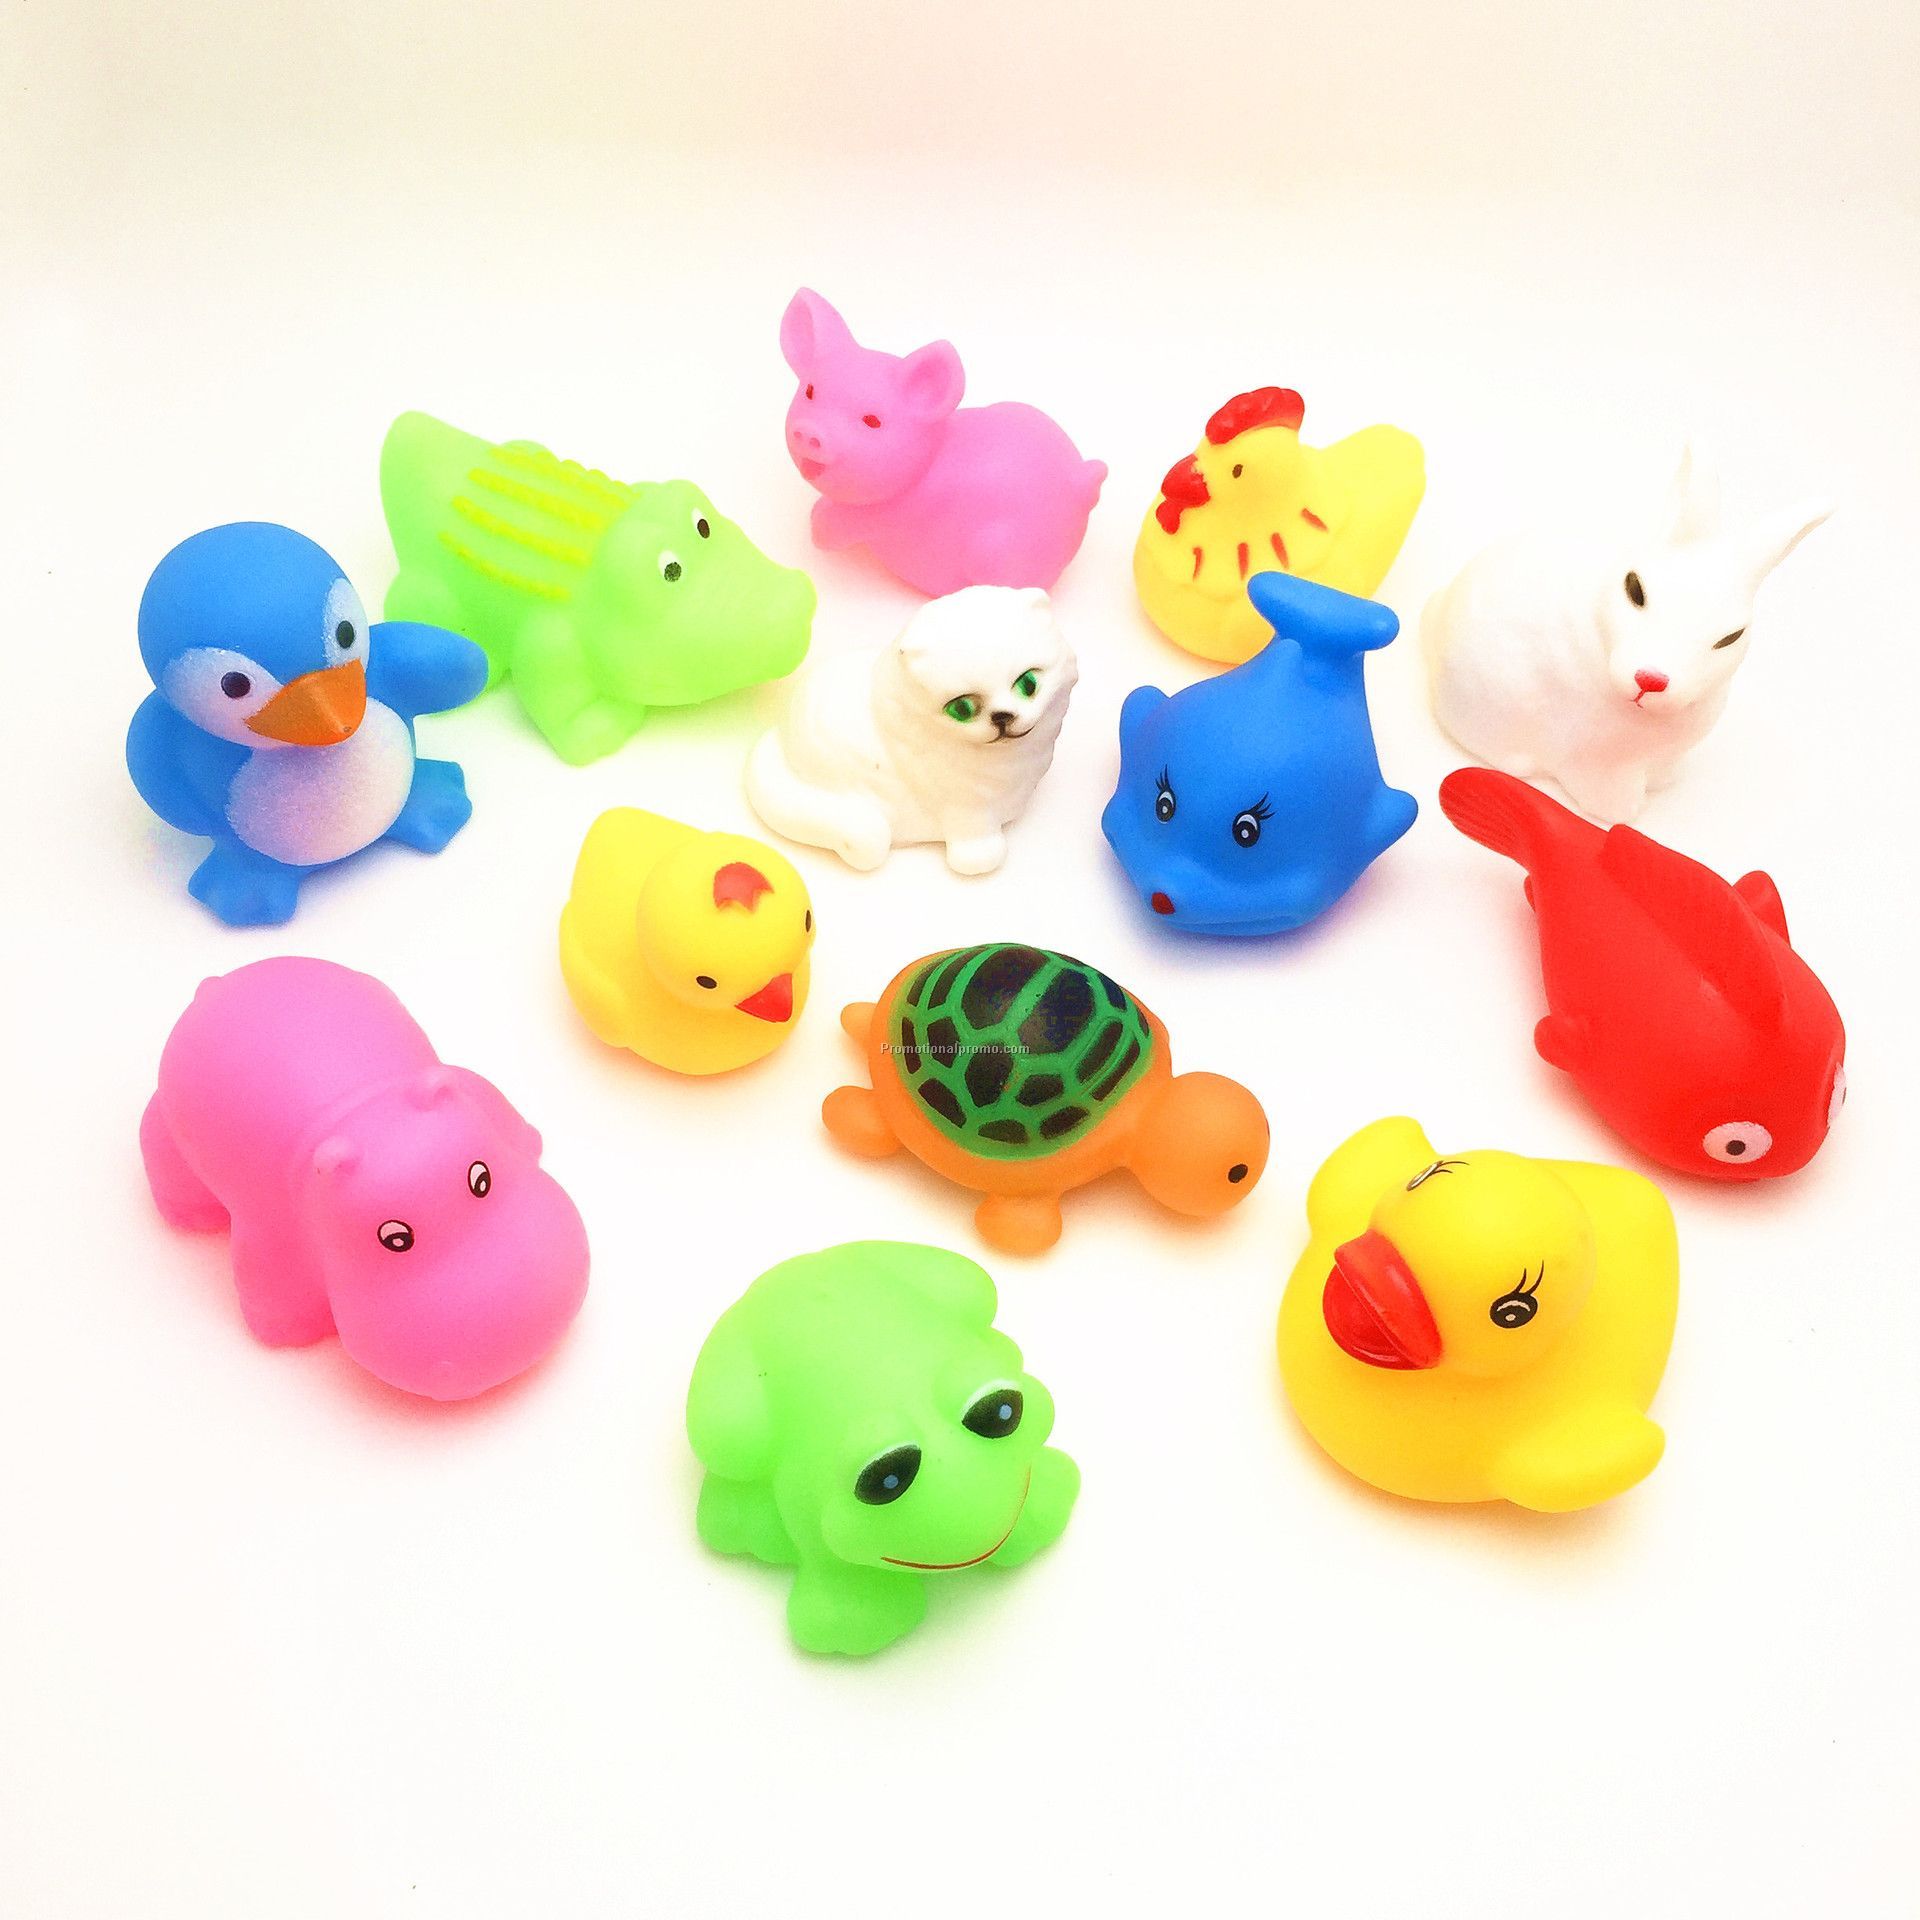 Hot floating rubber bathtub toy series for kids Photo 2